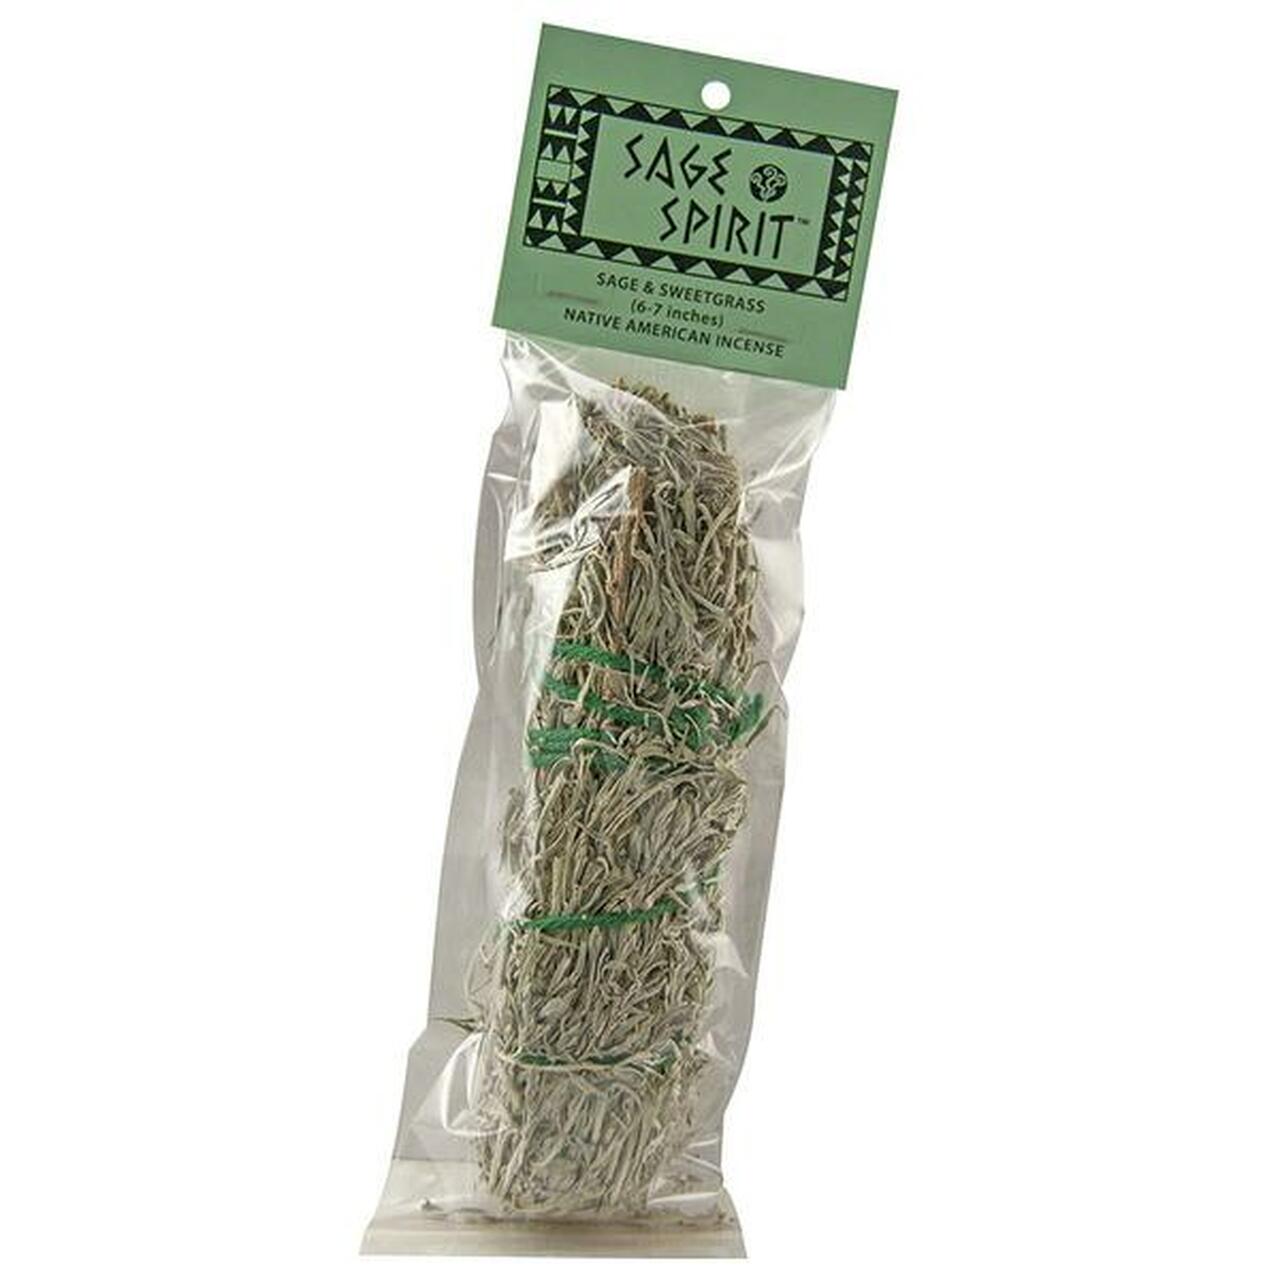 Product Listing Image for Sage Spirit Sage and Sweetgrass Smudge Stick